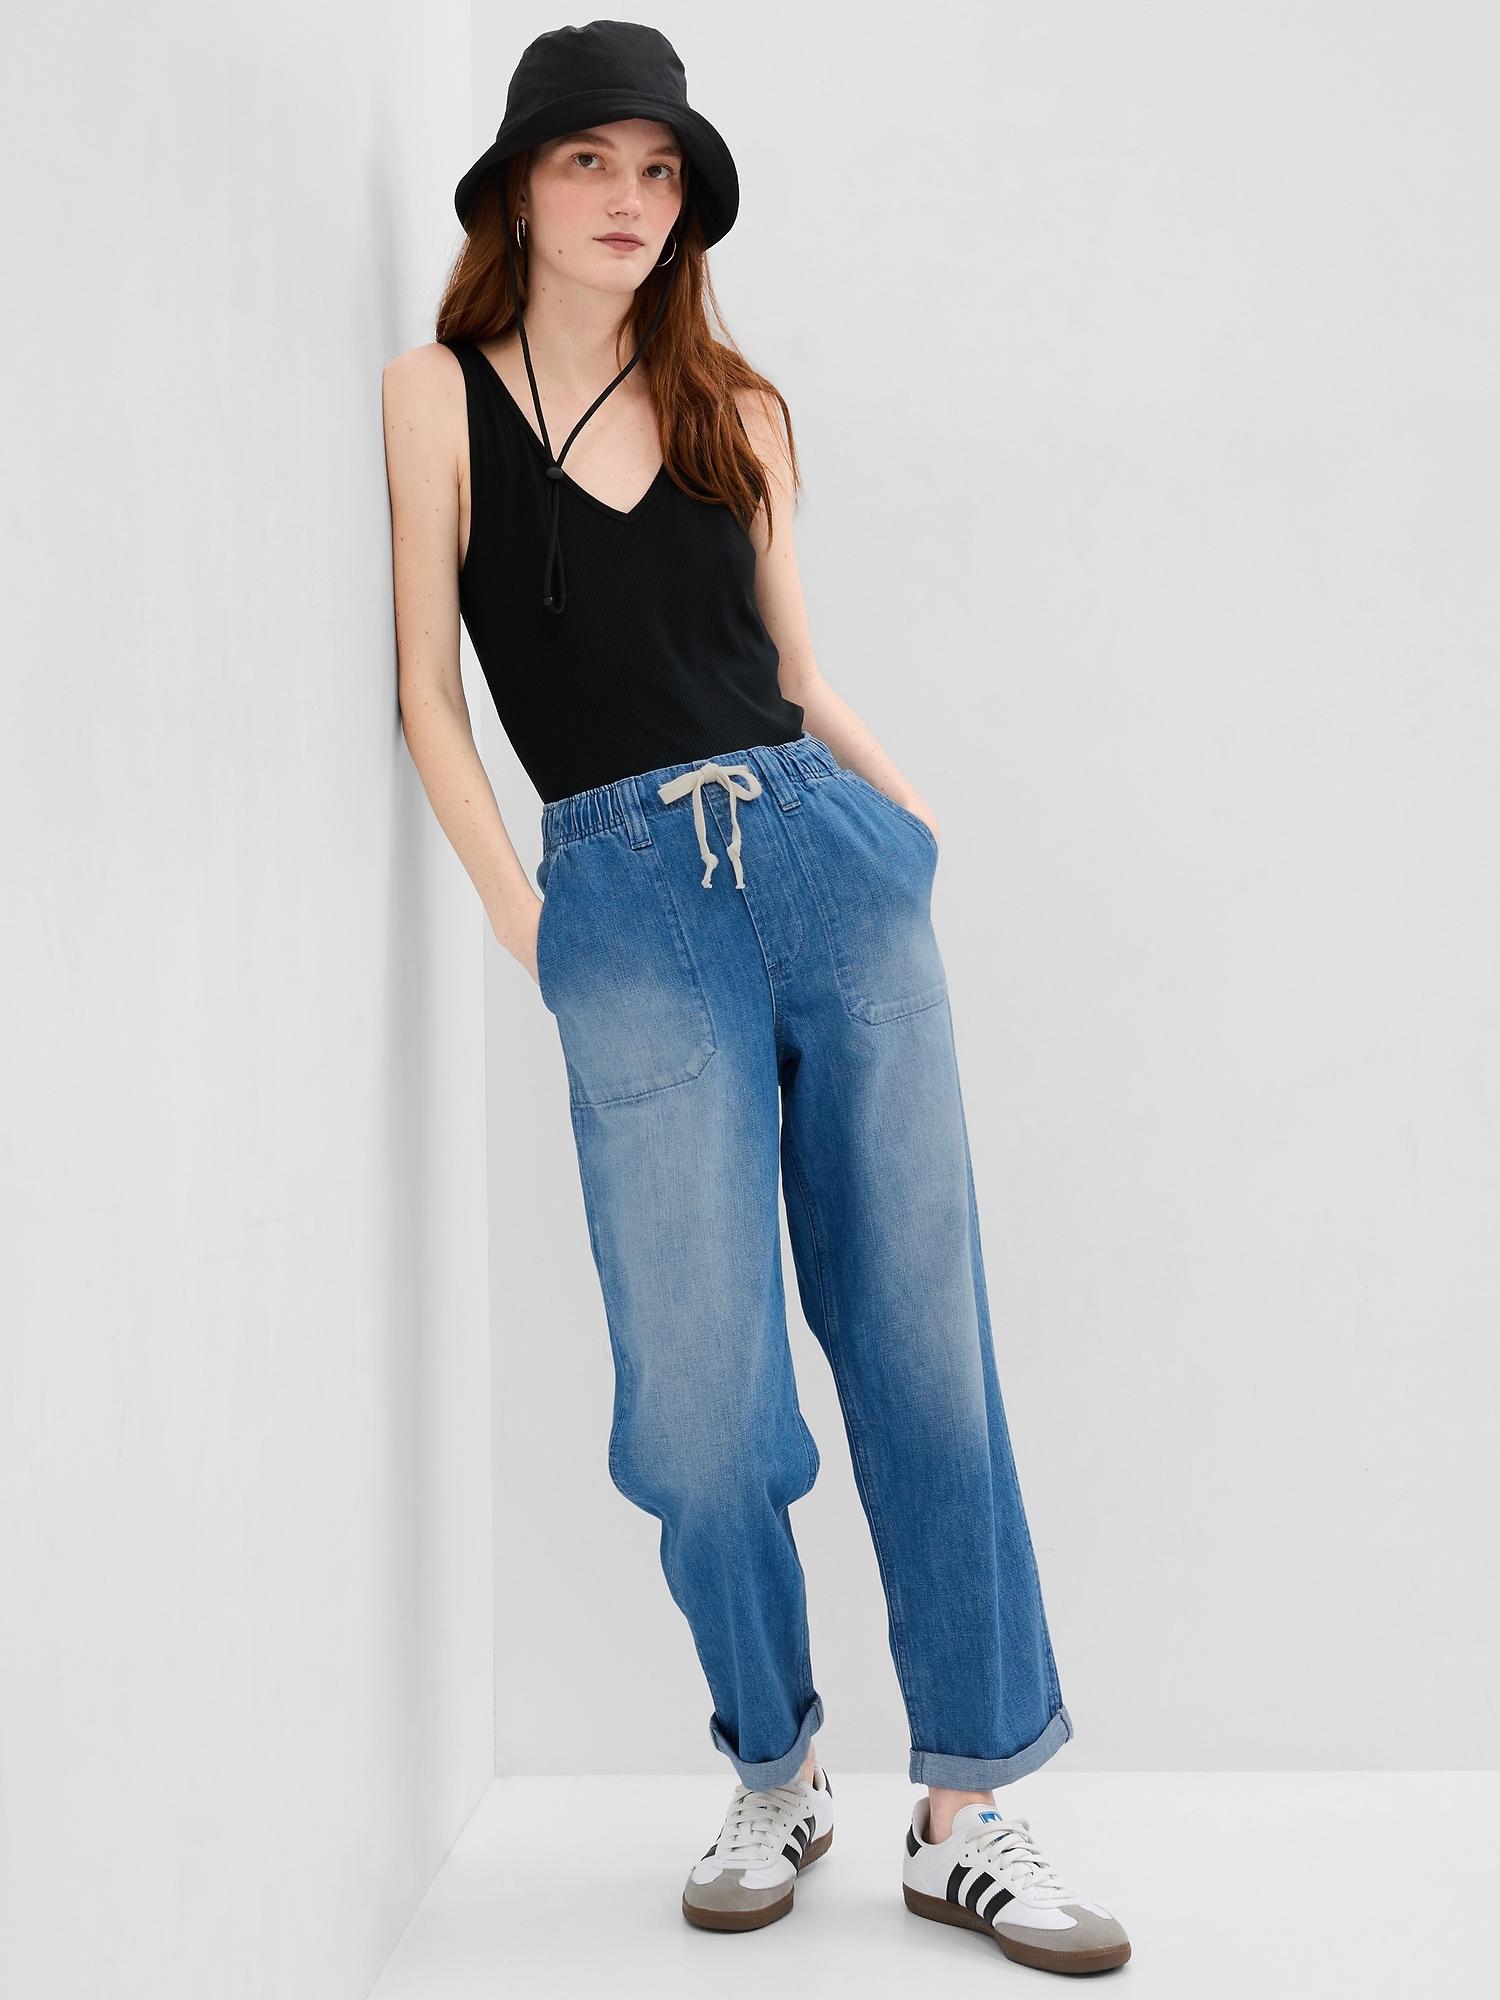 What Are Pull-On Jeans?